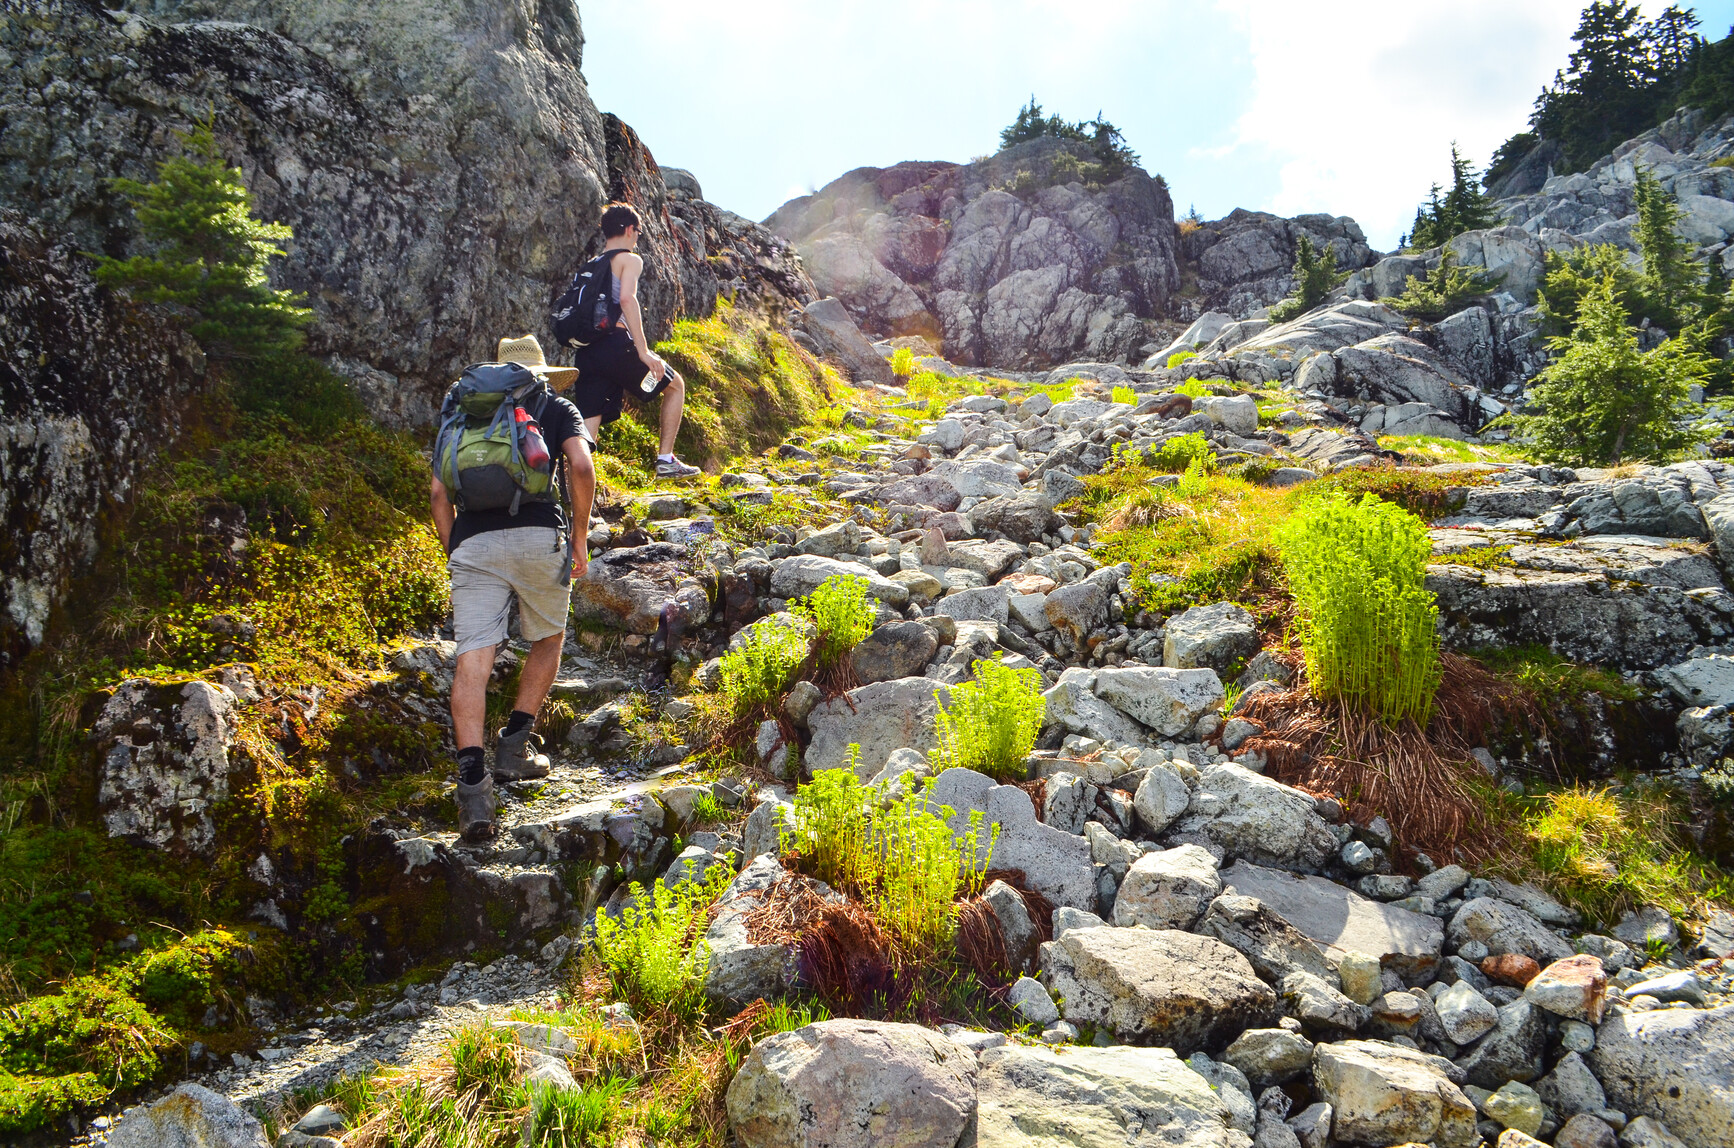 Hikers in a rocky, alpine area trail in the park.